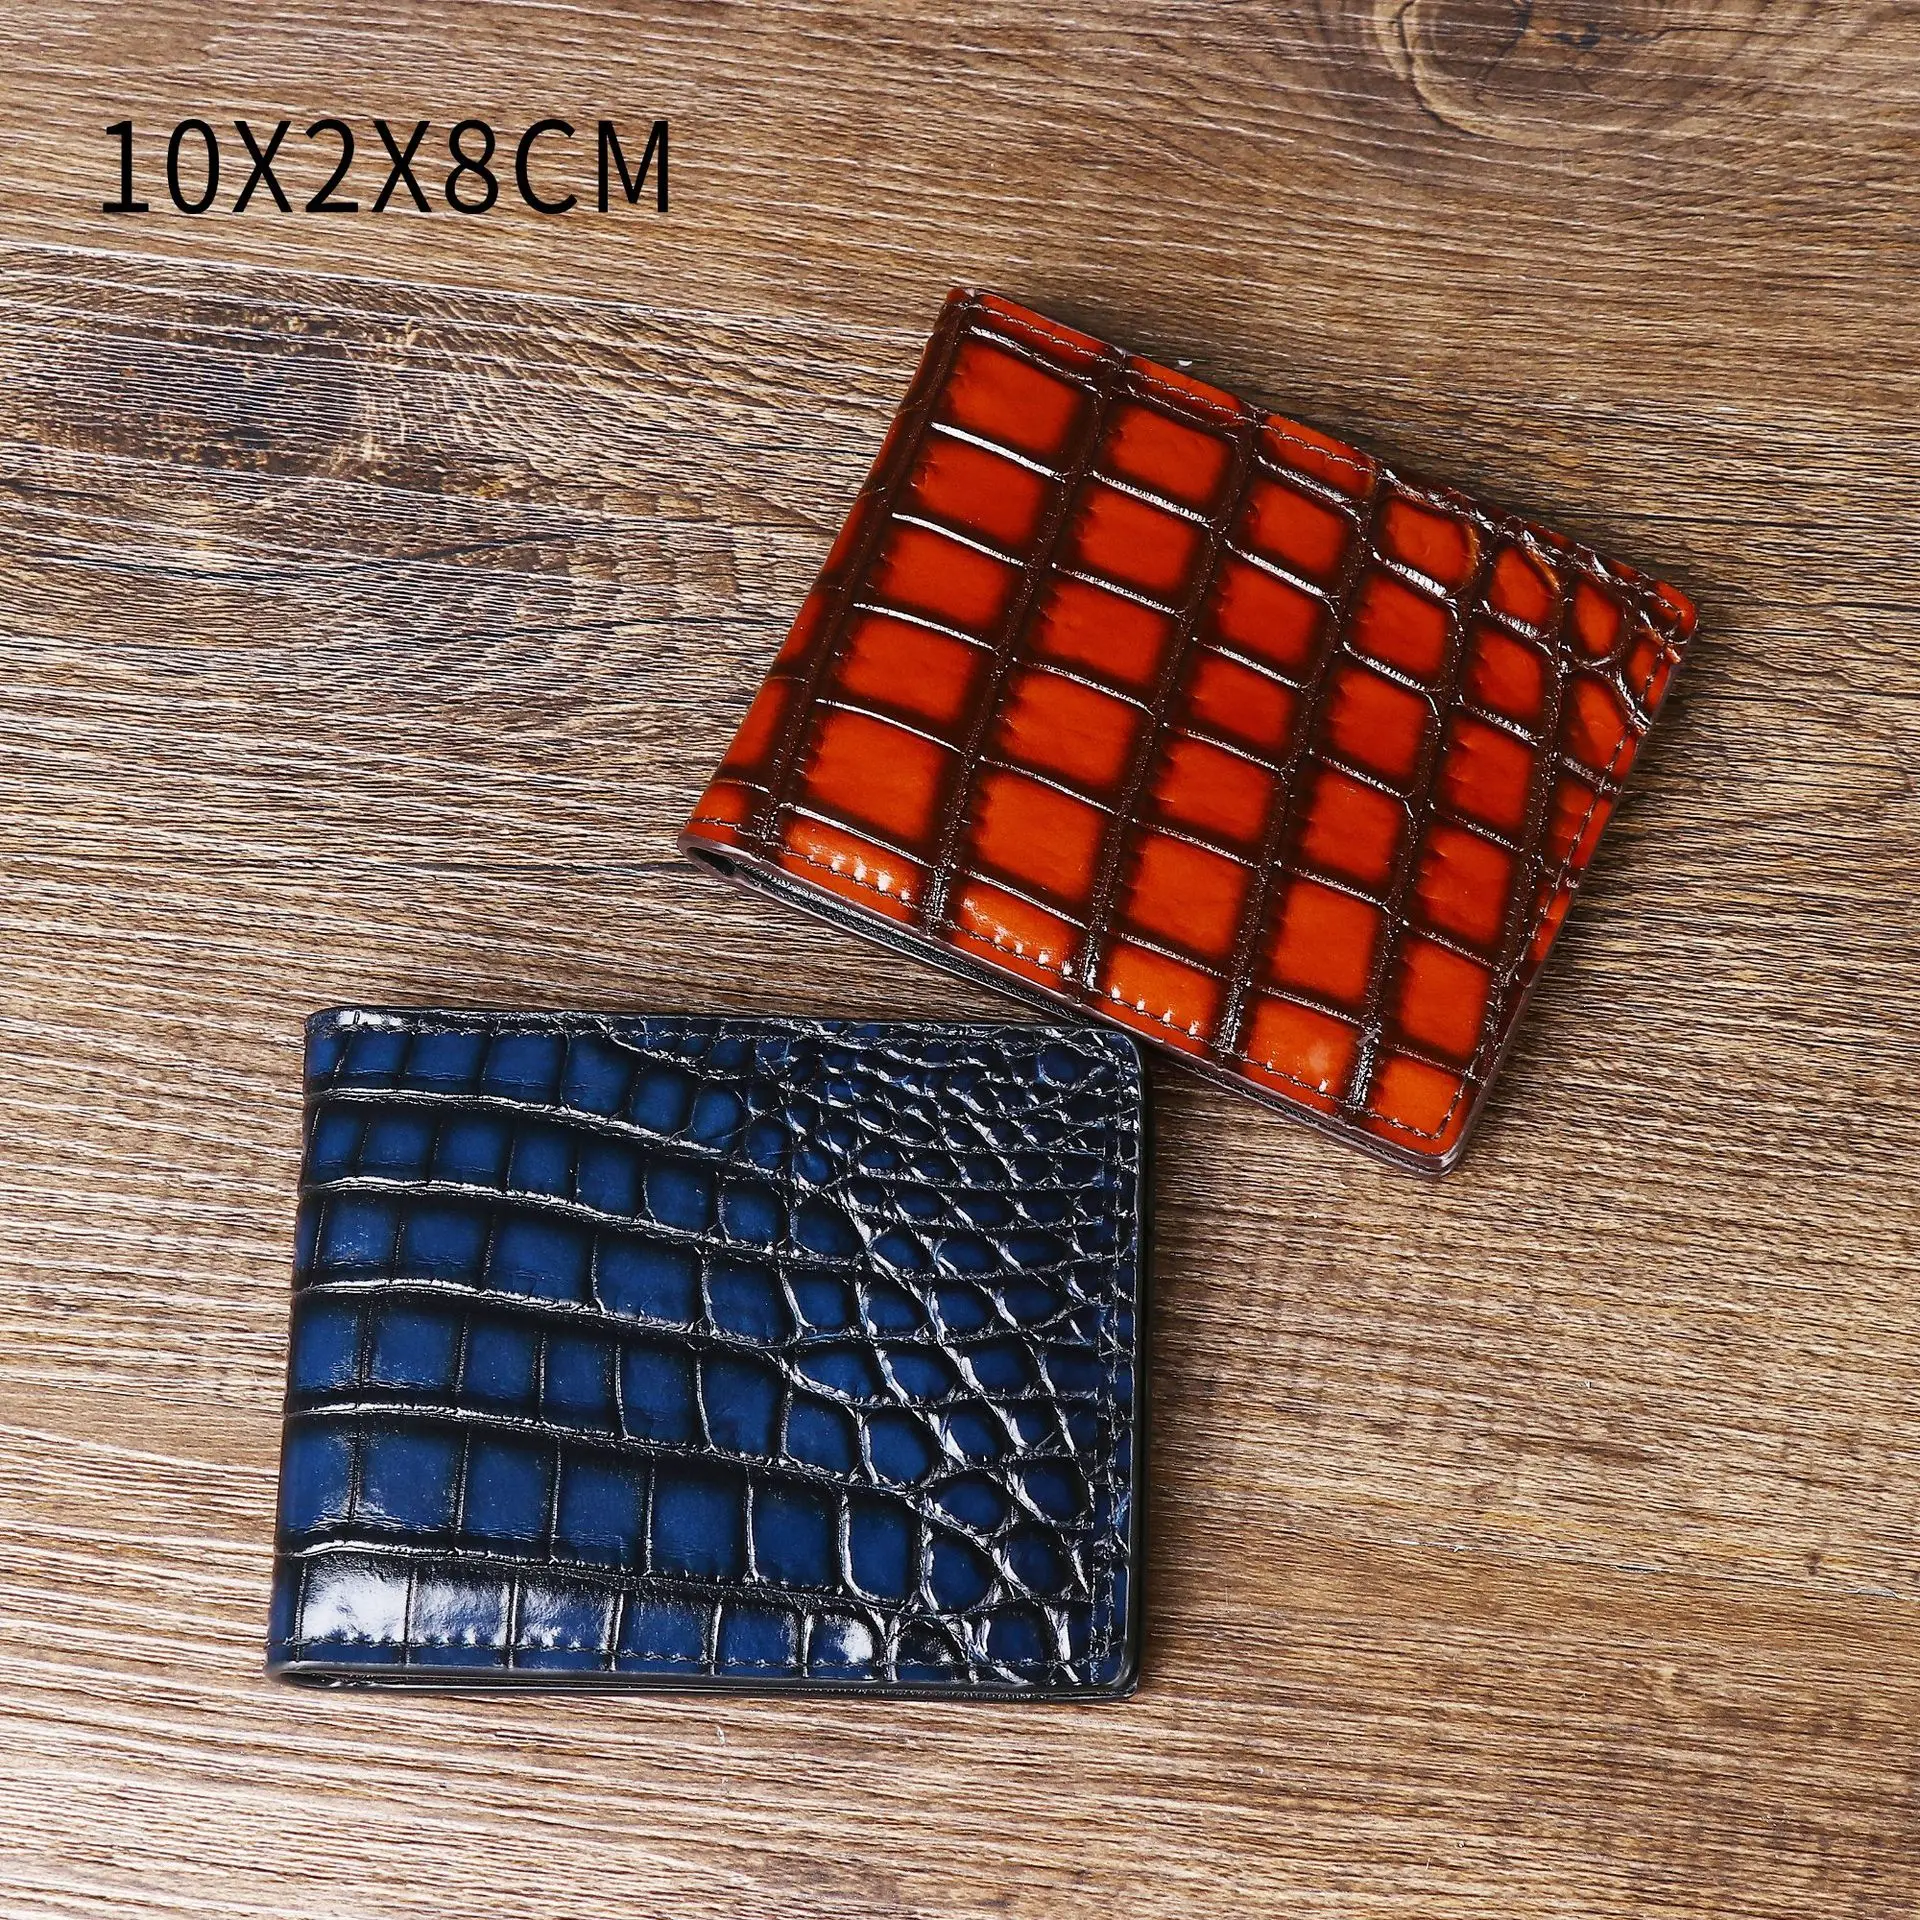 

Crocodile Belly Multi Functional Trendy Credit Card License Holder Bag Small Wallet Female Coin Purses Holders кошелек женский